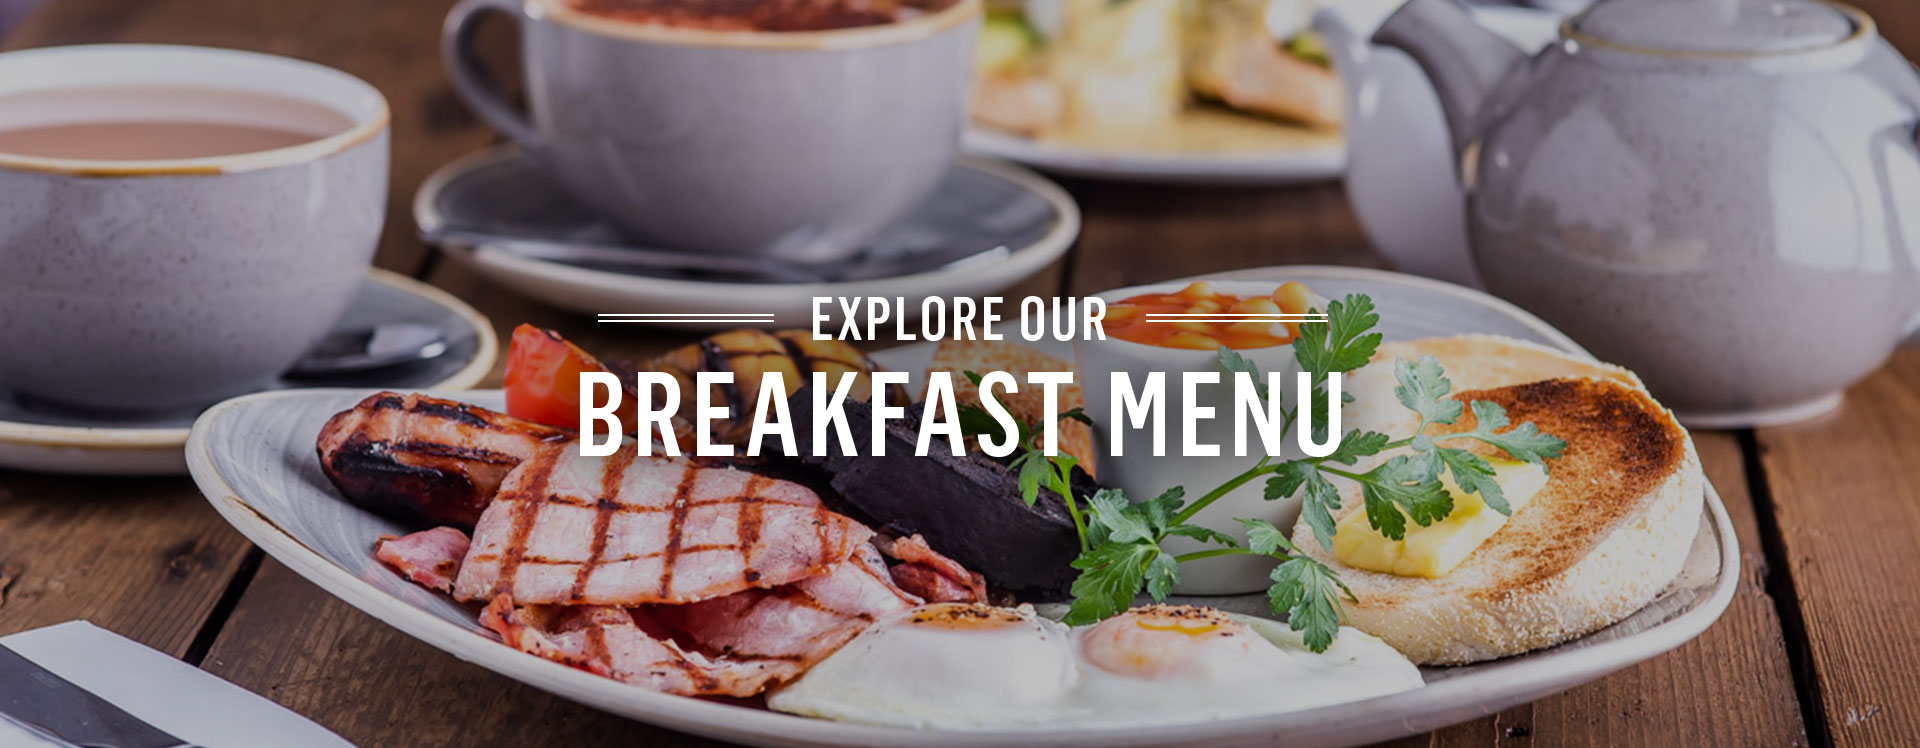 Breakfast at The Carpenter's Arms - Book a table